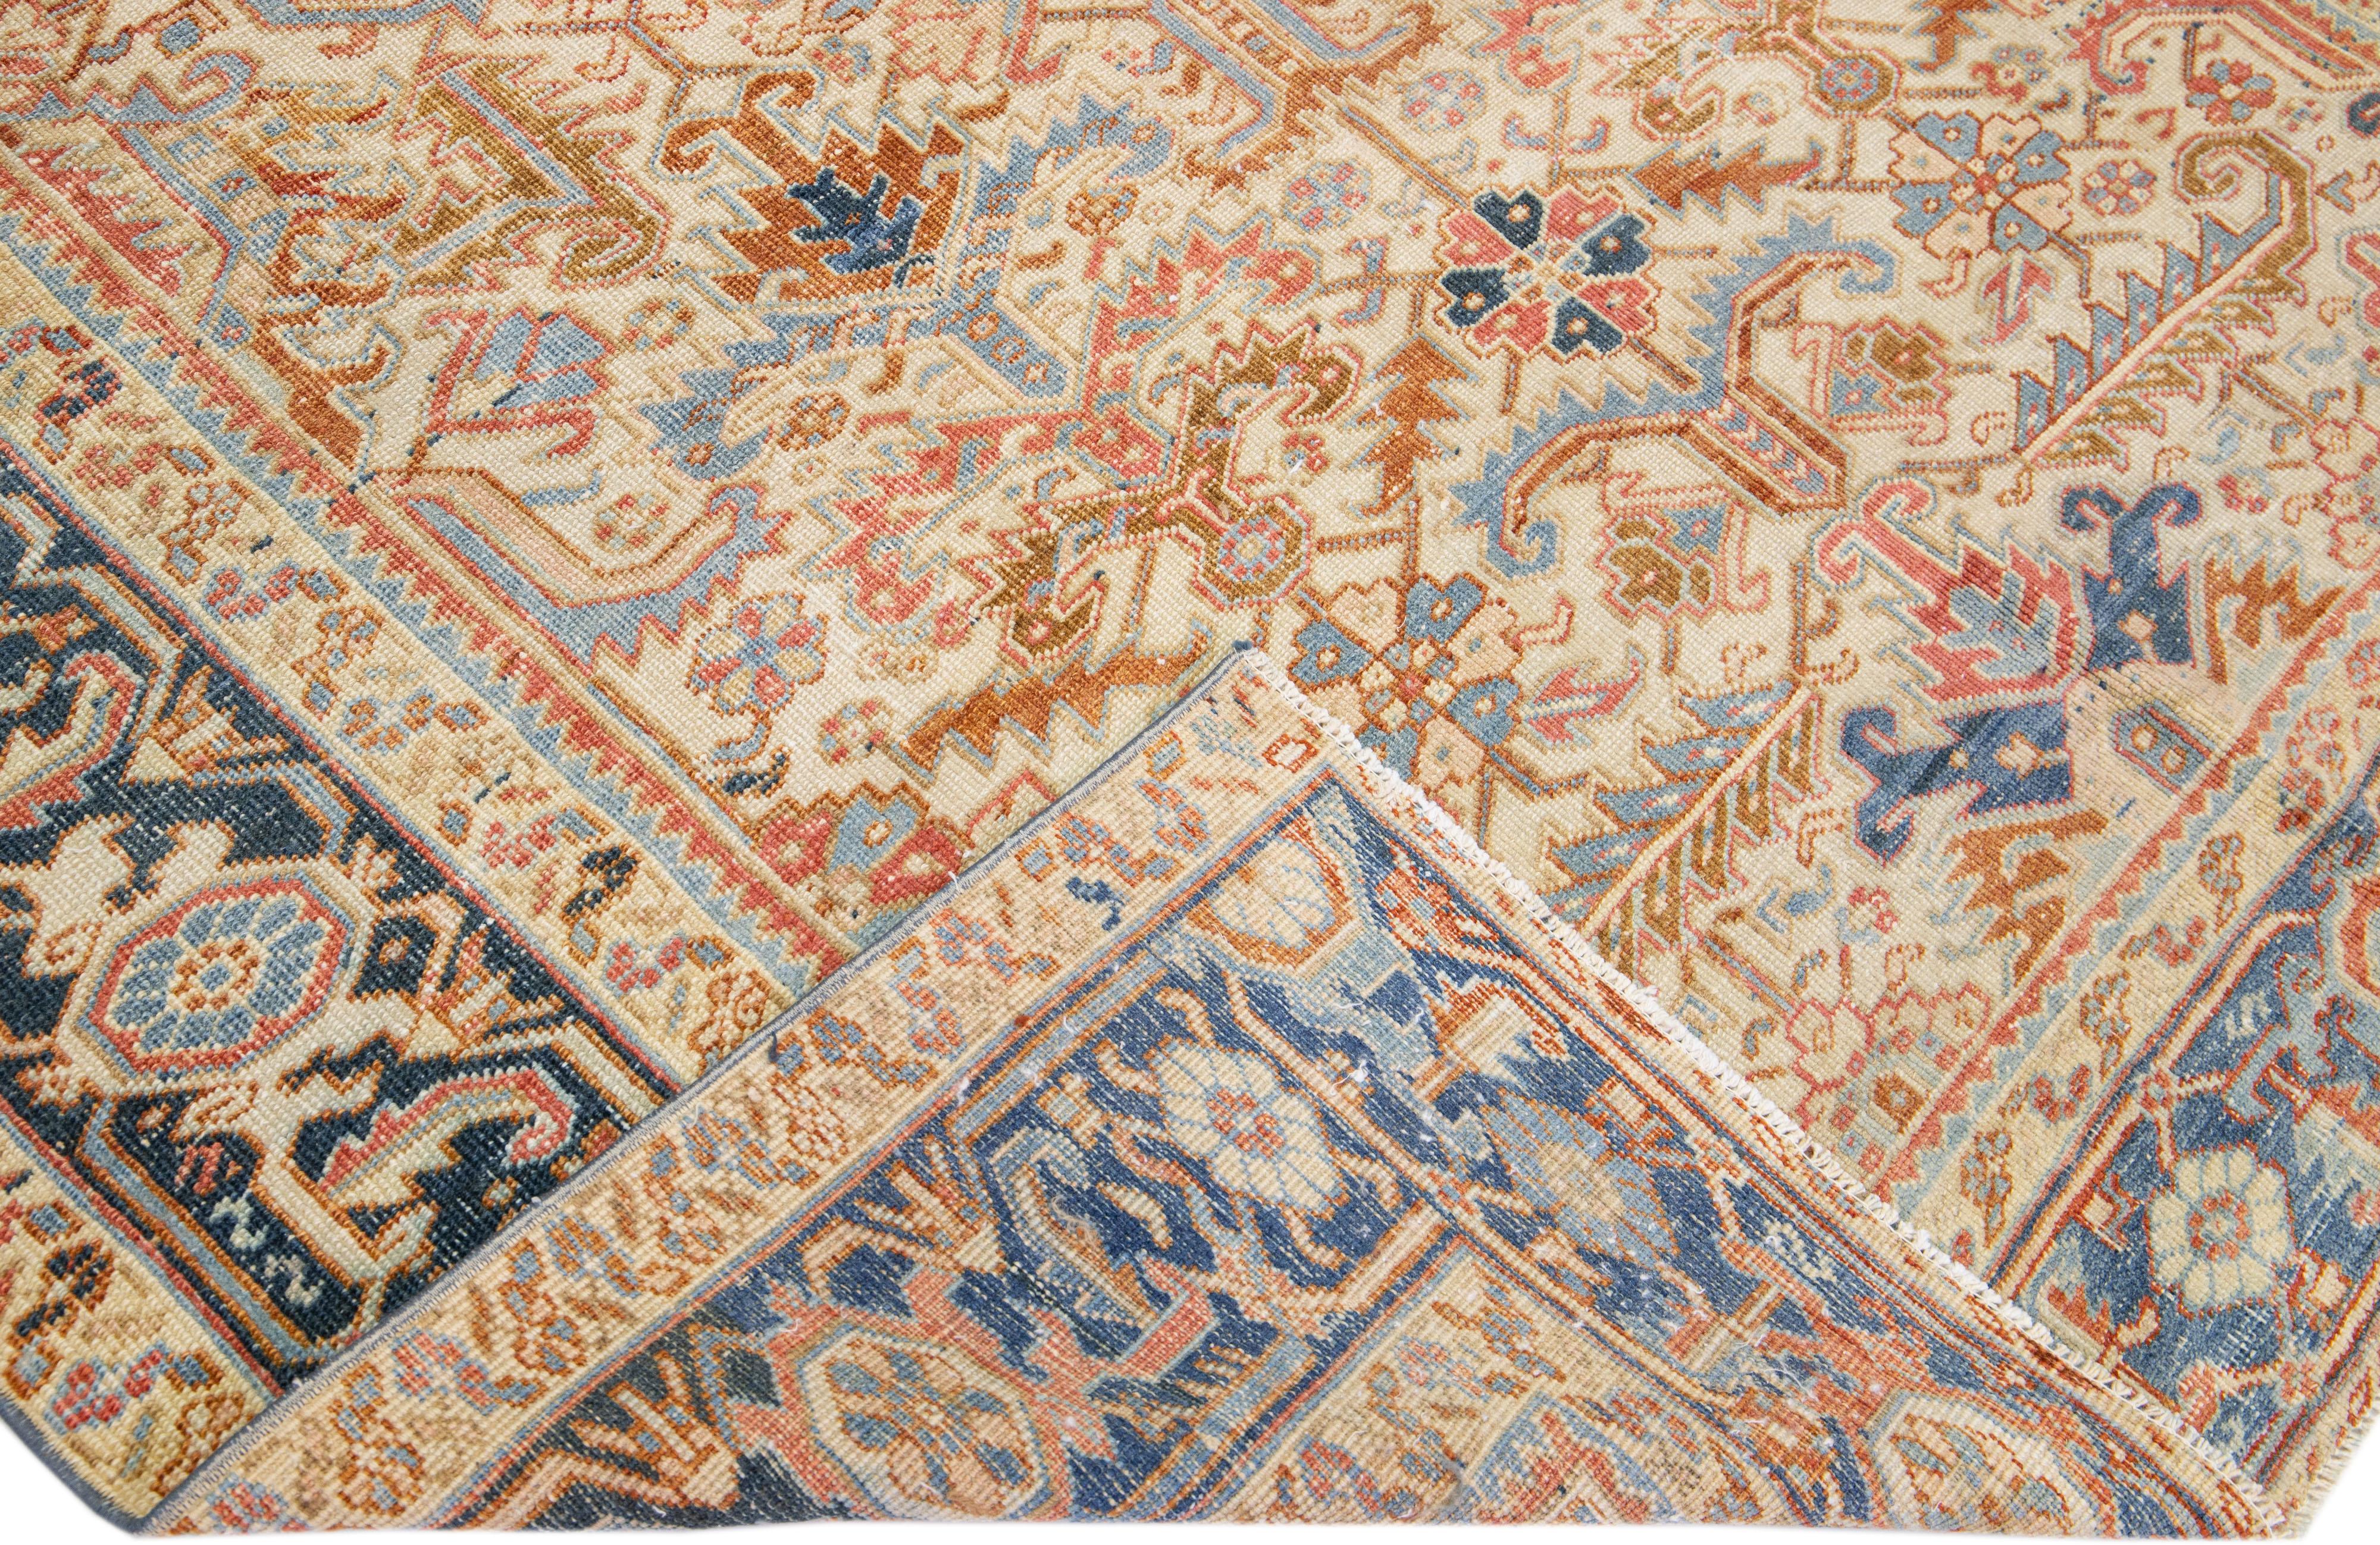 Beautiful antique Heriz hand-knotted wool rug with a rust color field. This Persian rug has a blue frame with tan and beige accents in a gorgeous all-over geometric floral medallion design.

This rug measures: 7'5